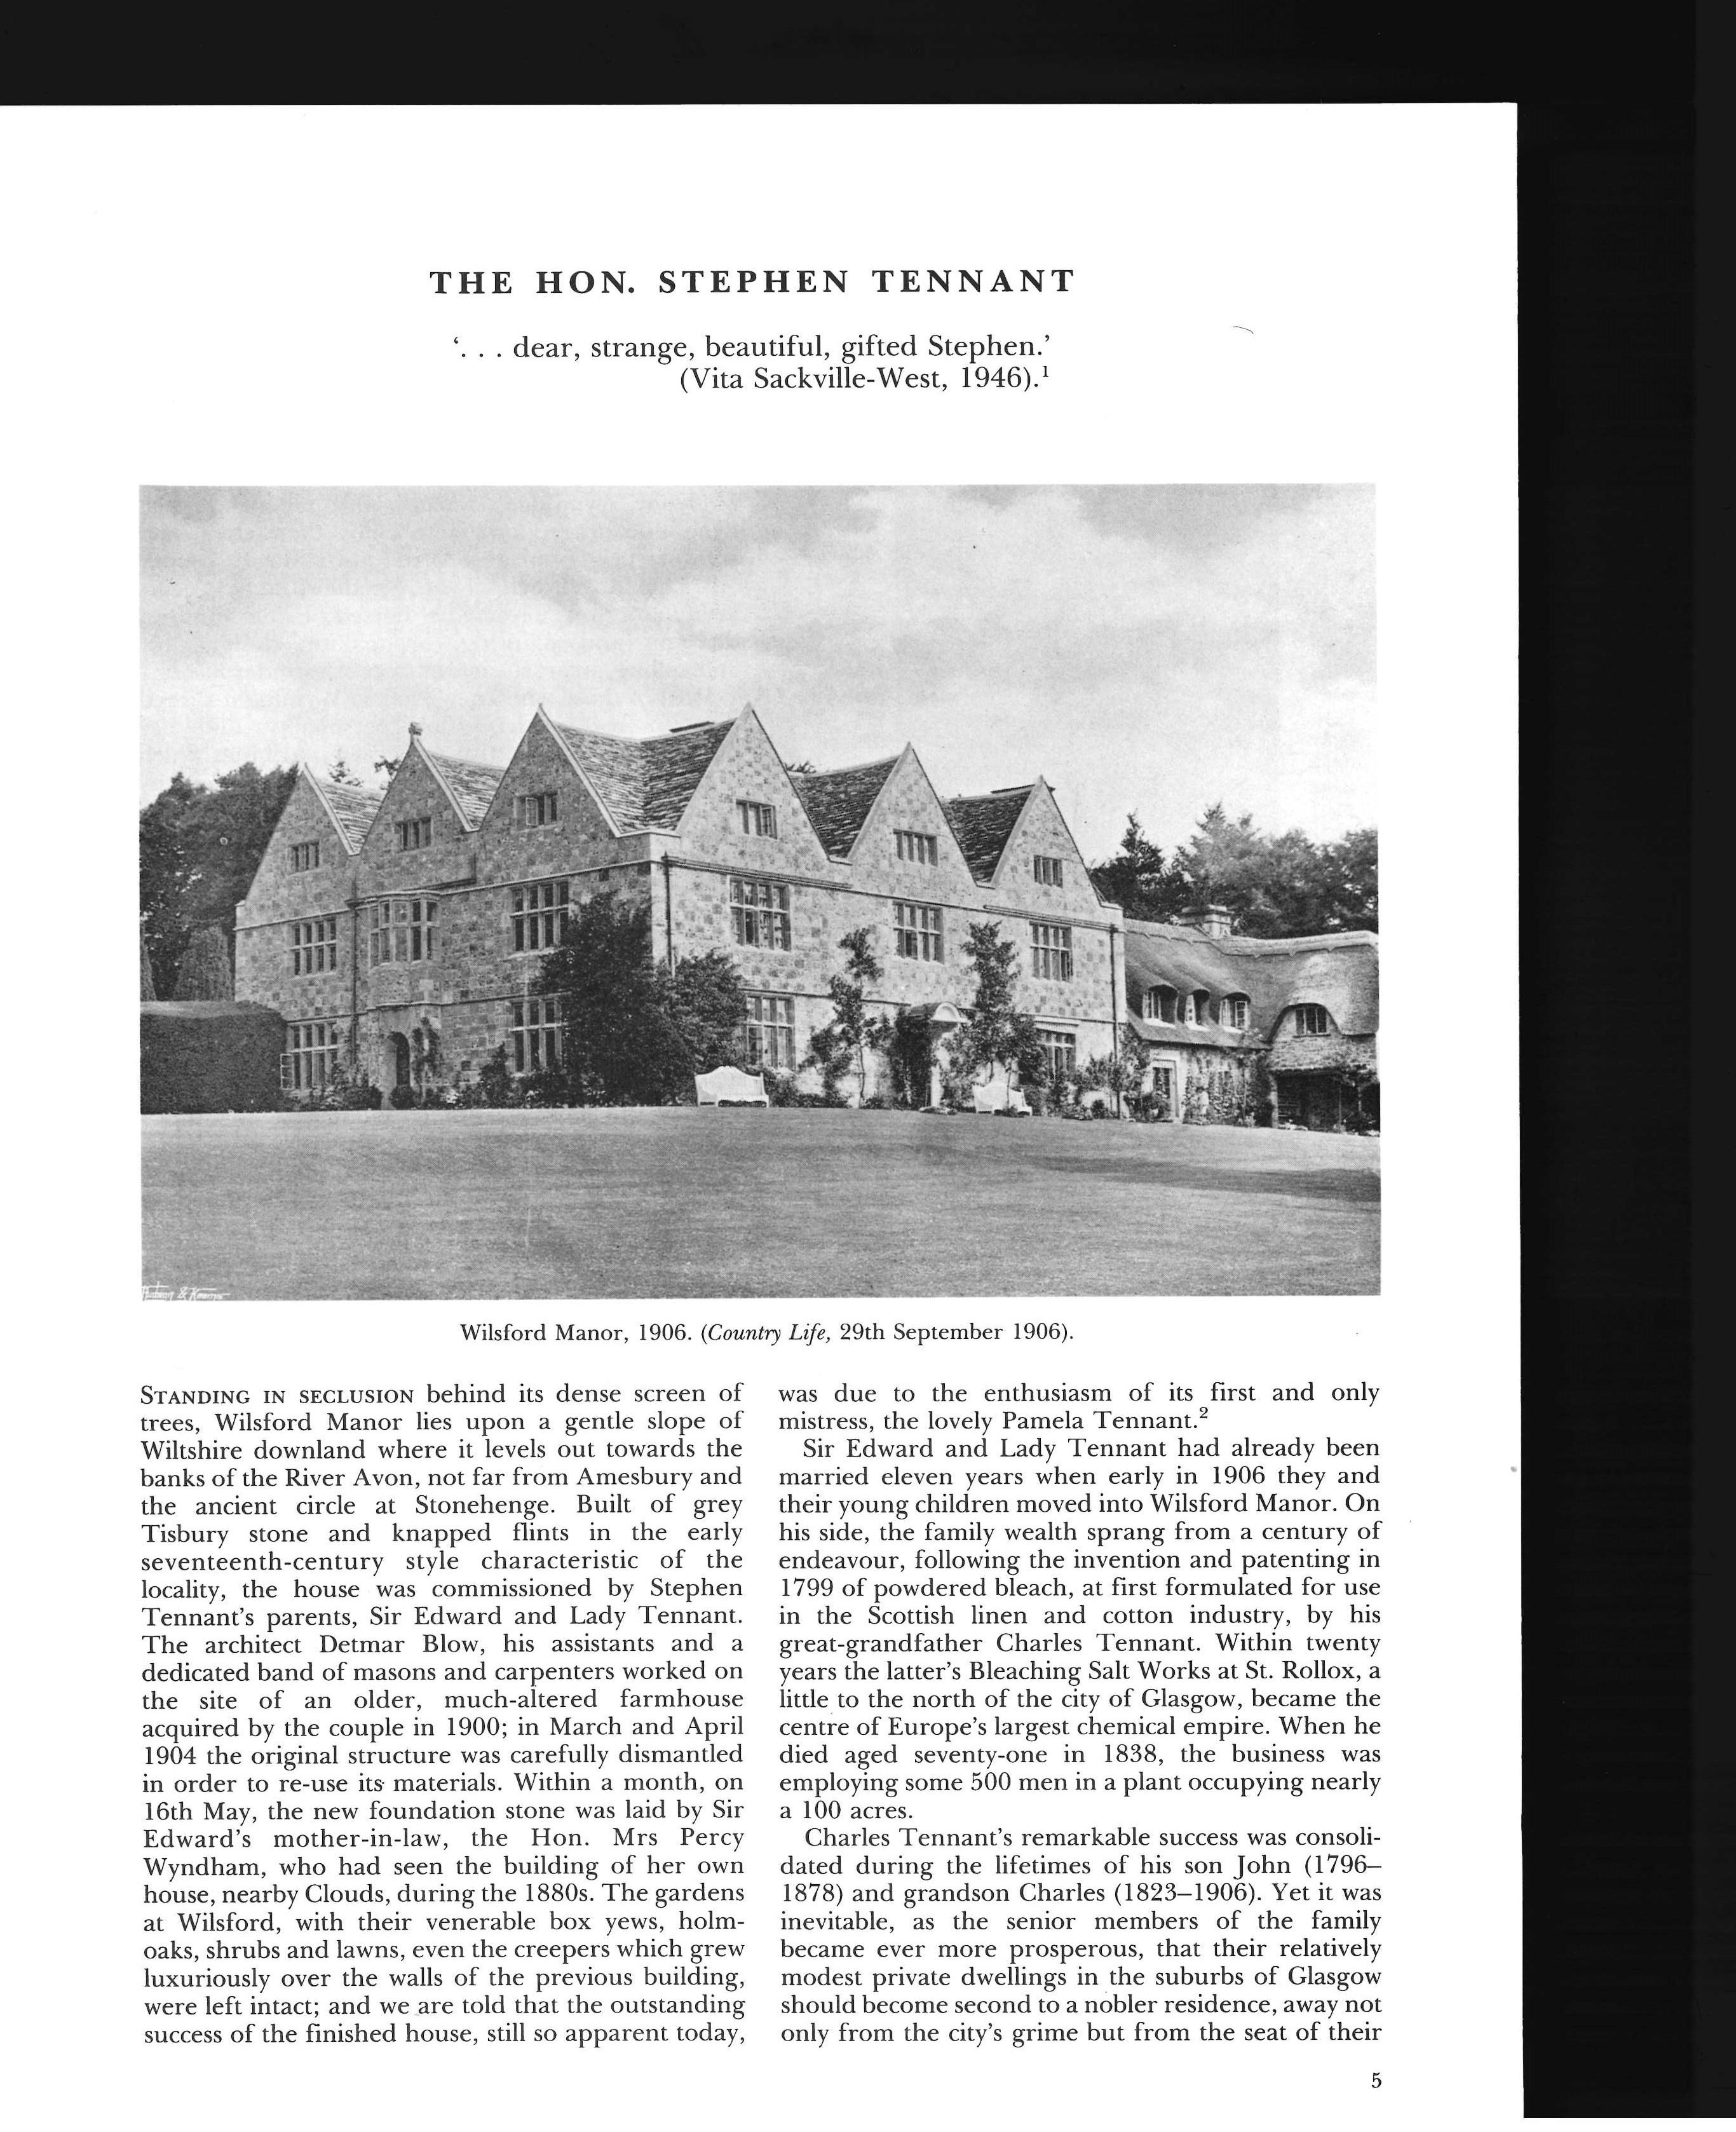 A scarce sale catalogue produced by Sotheby's in 1987 to dispose of the contents of Wilsford Manor - the home of The Honourable Stephen Tennant. Featuring 939 lots, all with description and price guides - many of which are photographed or